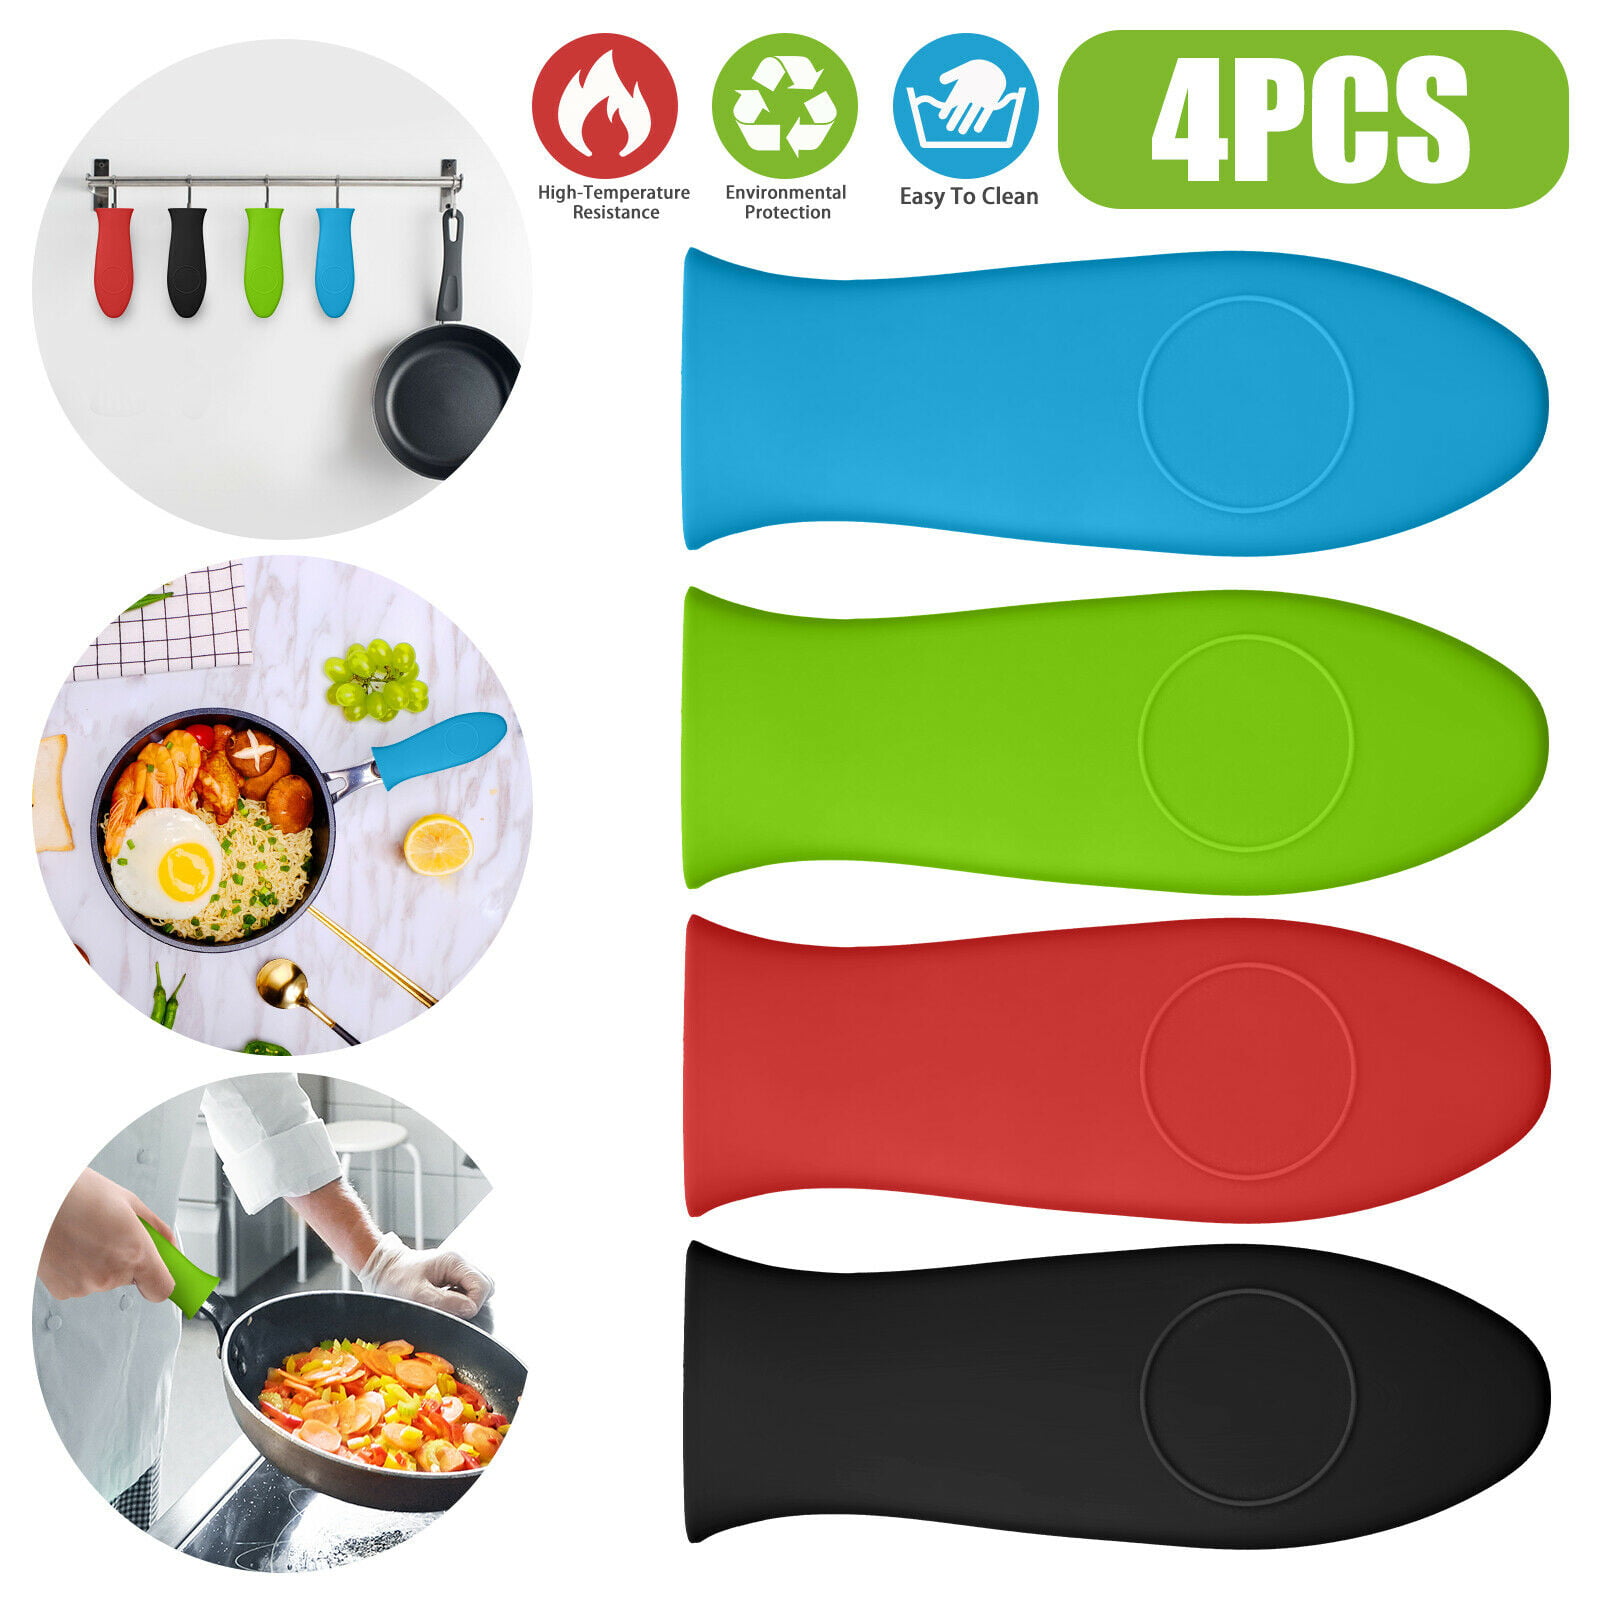 Details about   4Pcs Silicone Pot Holder Cast Iron Hot Skillet Handle Cover Pan Sleeve Kitchen 